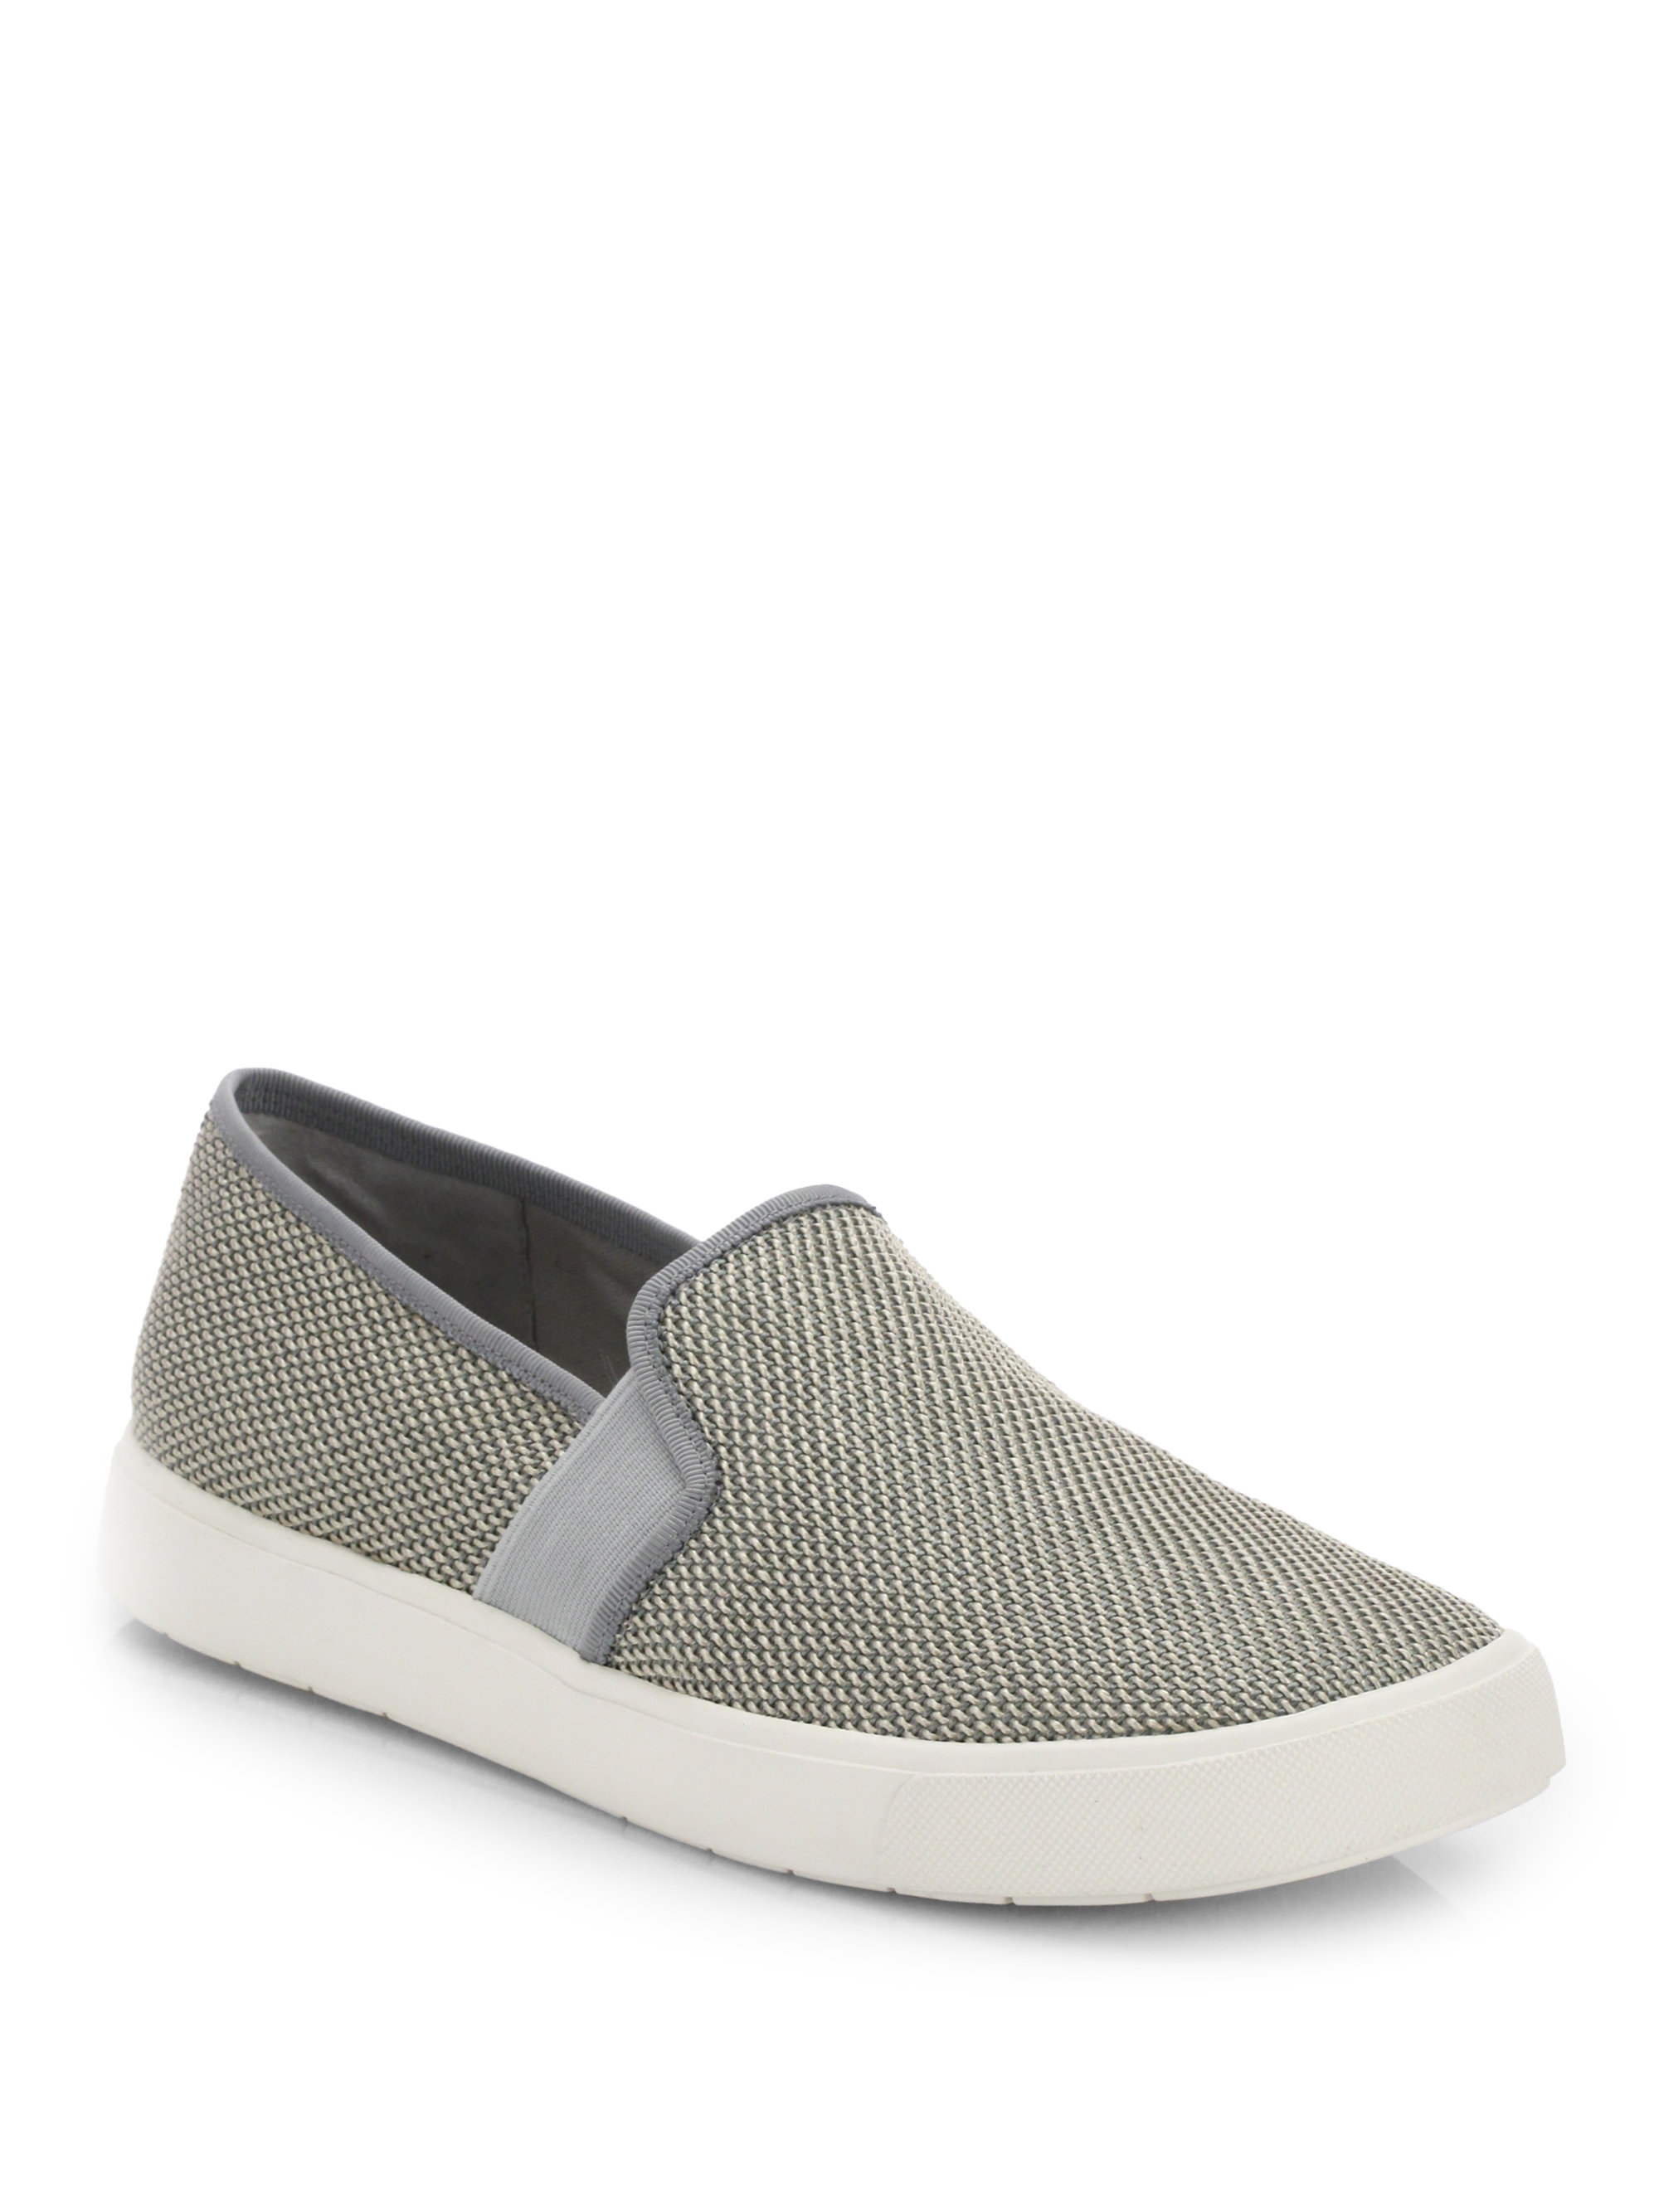 Lyst - Vince Blair Woven Canvas Slipon Sneakers in Gray